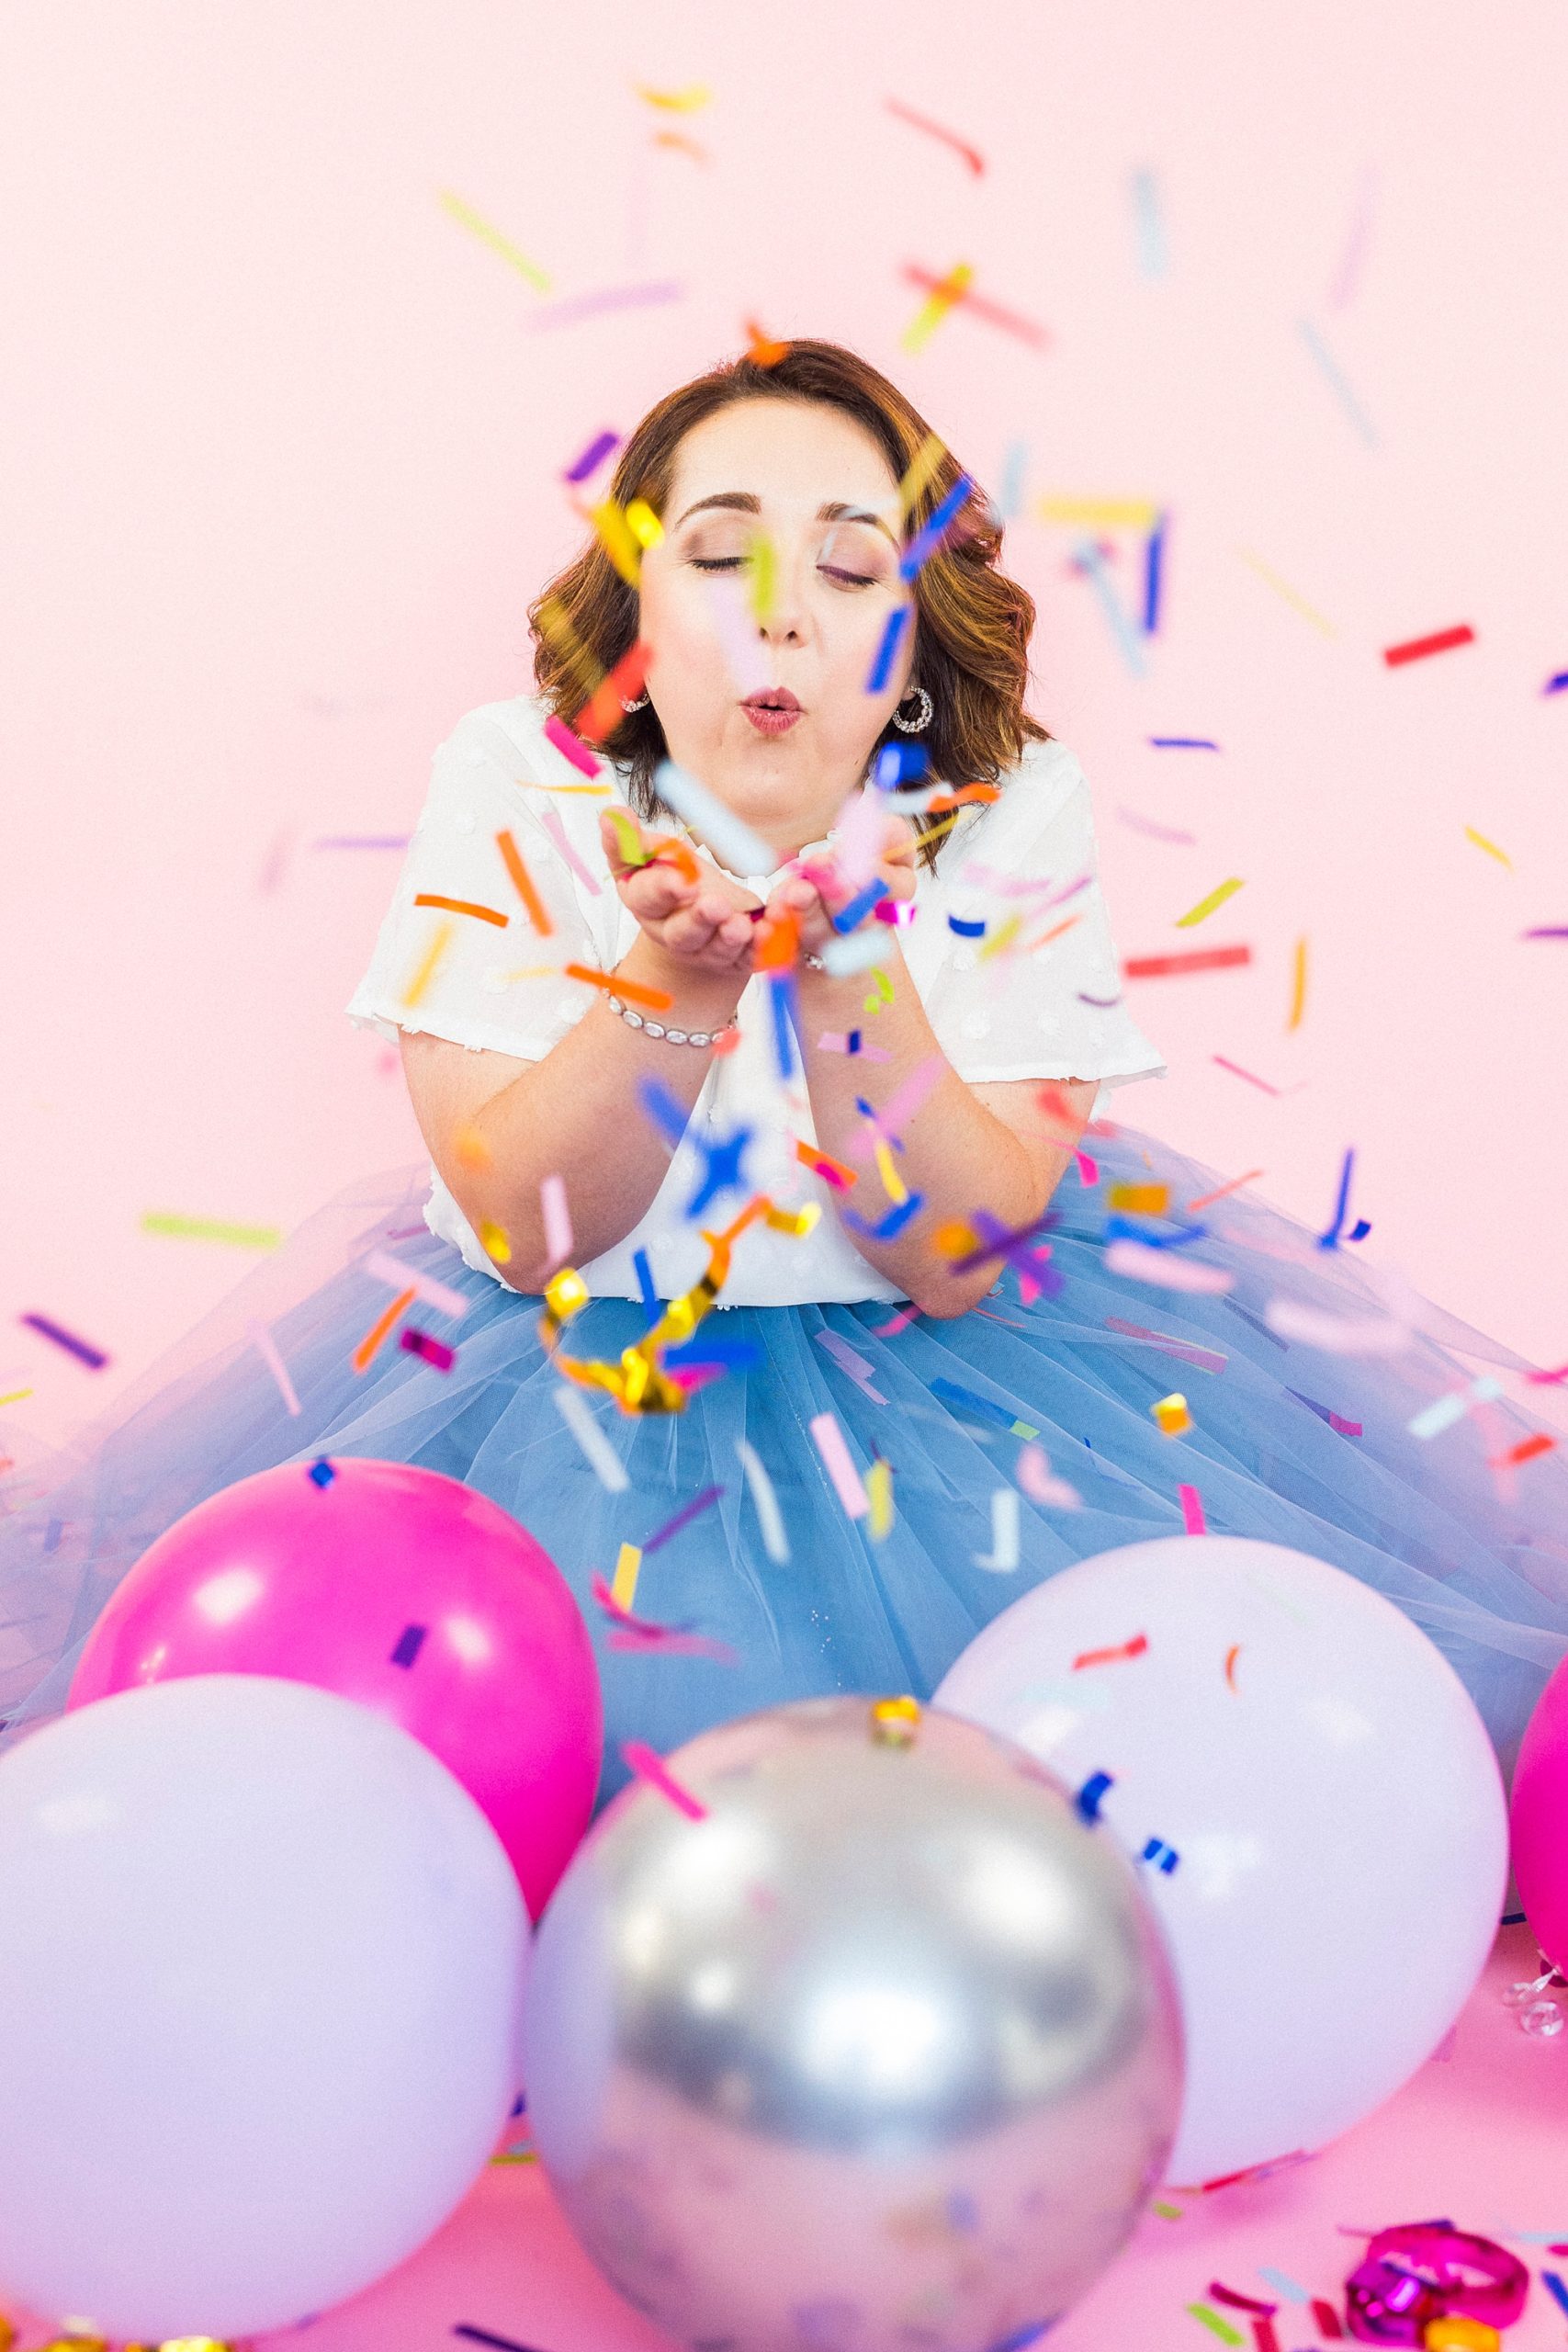 birthday girl blows confetti out of her hands during 30th birthday portraits